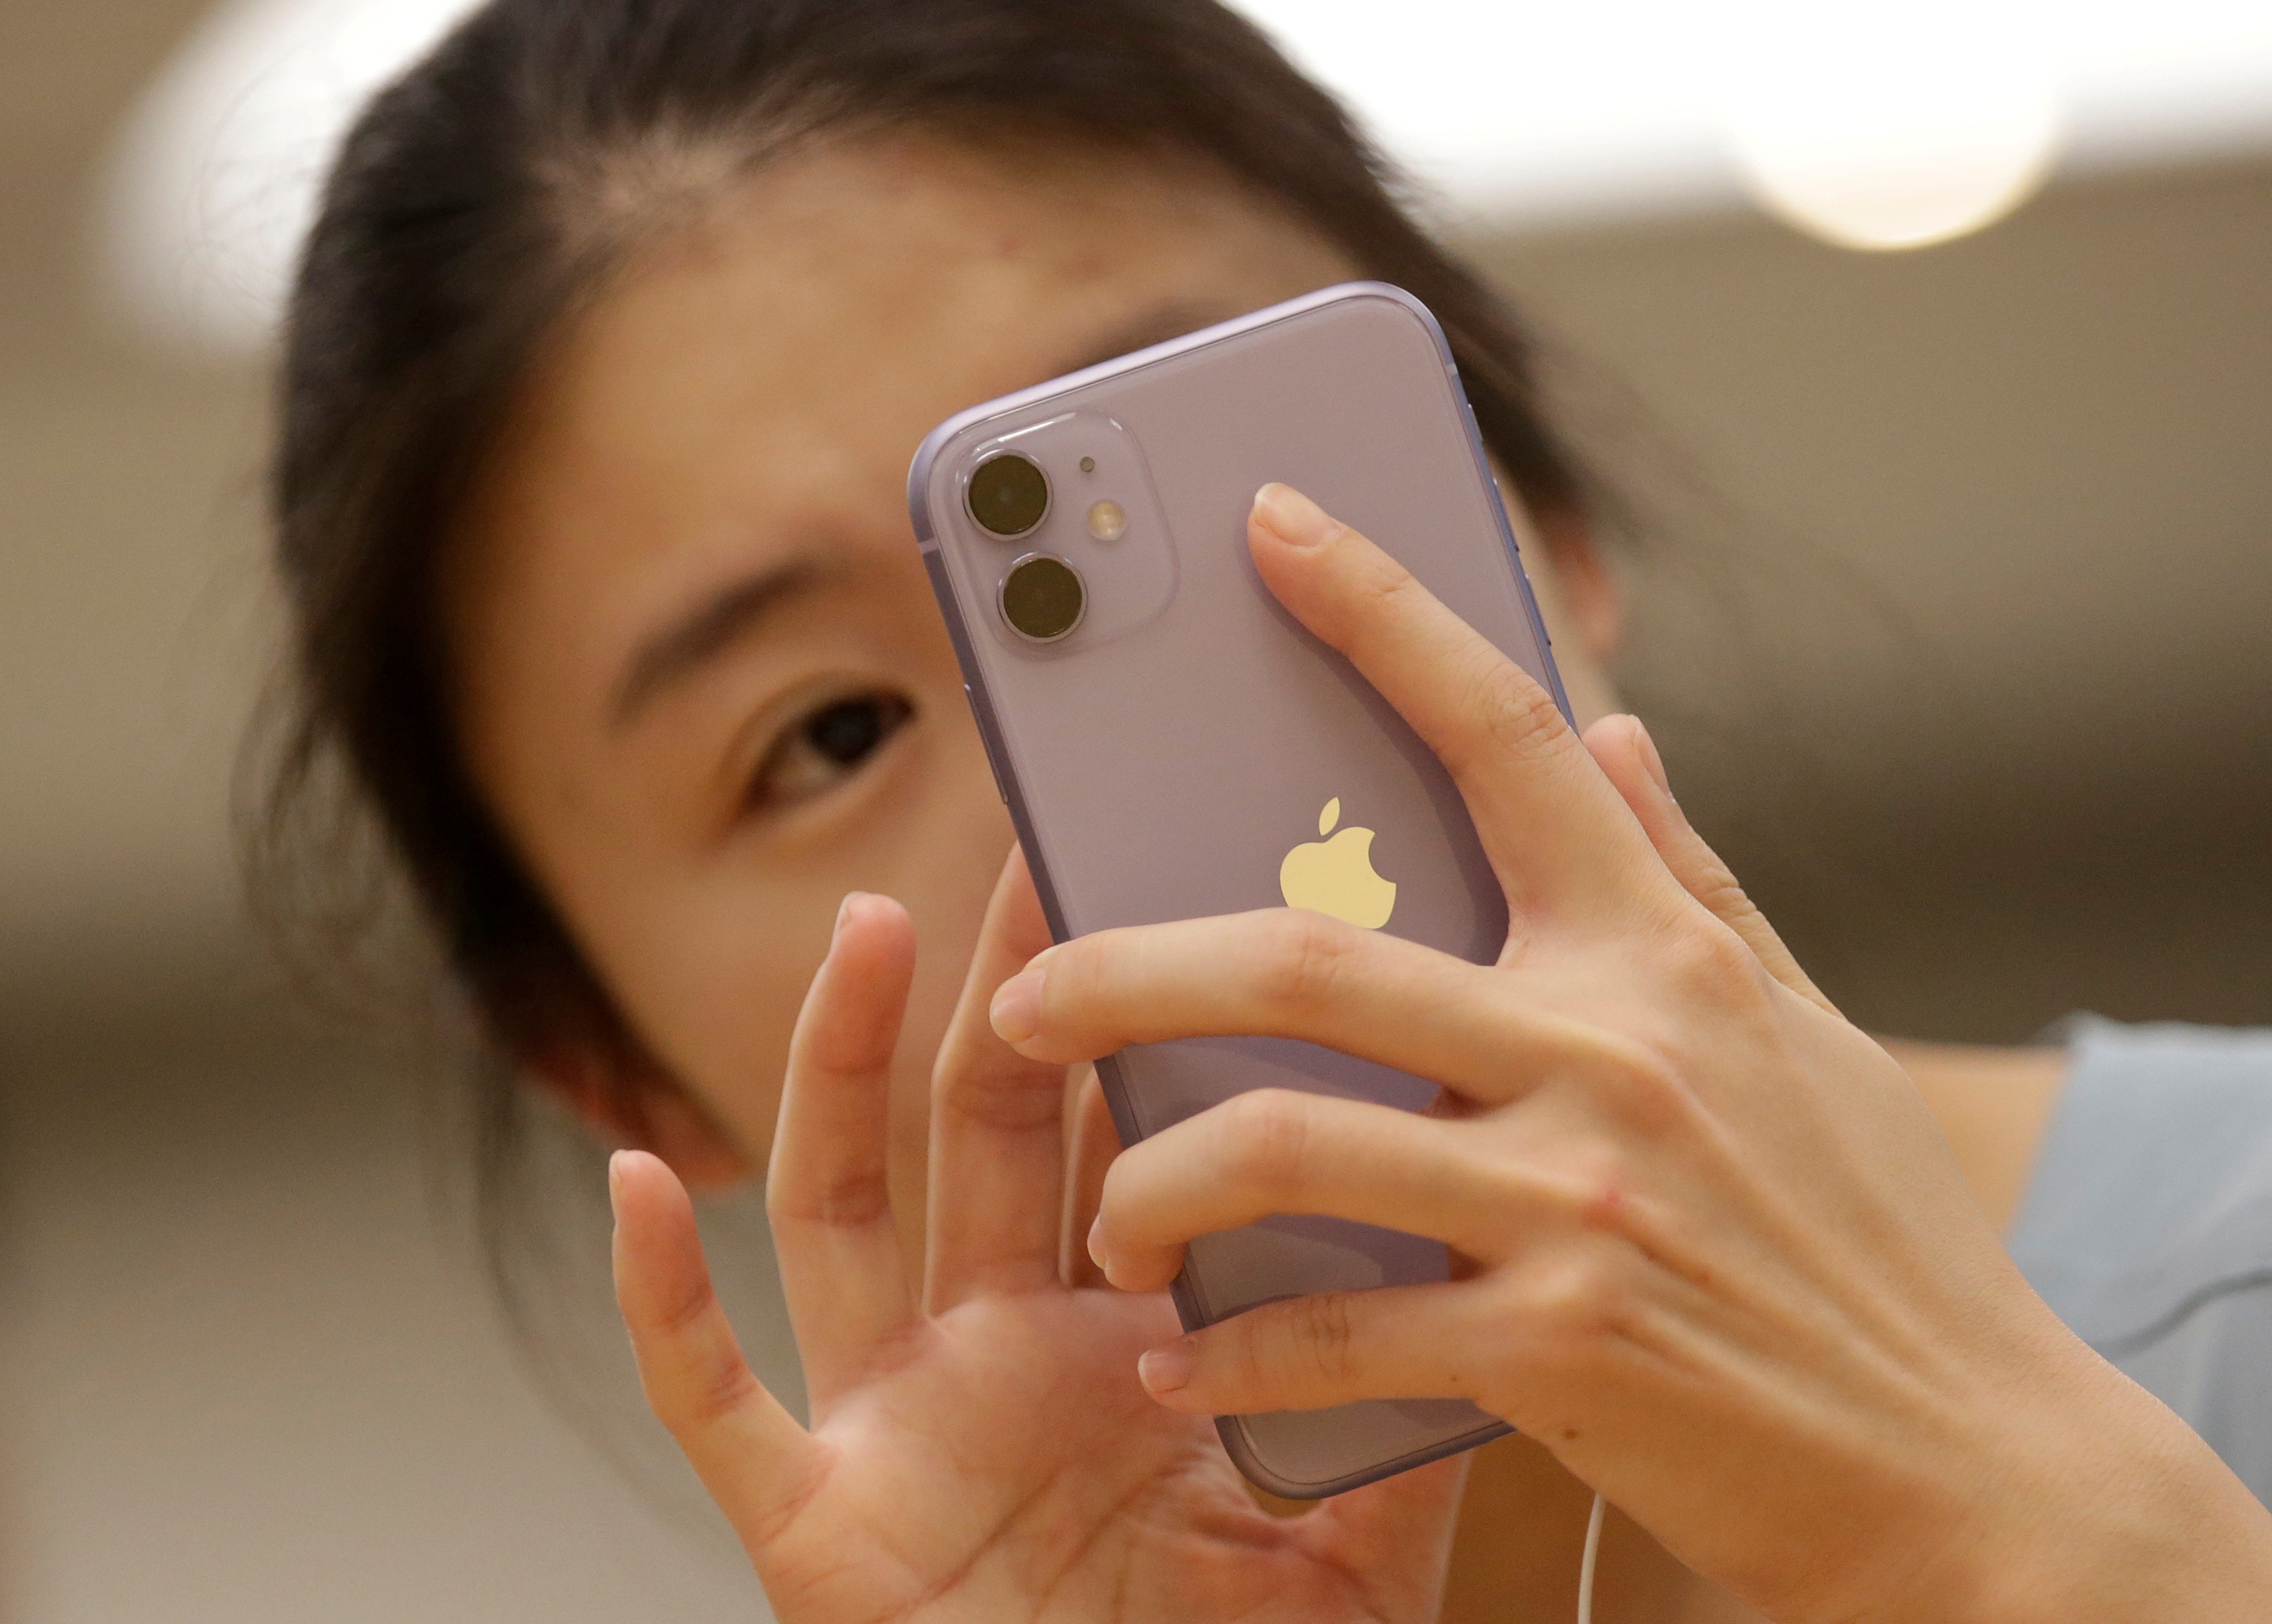 Apple takes two thirds of the pie in global smartphone profits with only 12  per cent market share, says report | South China Morning Post